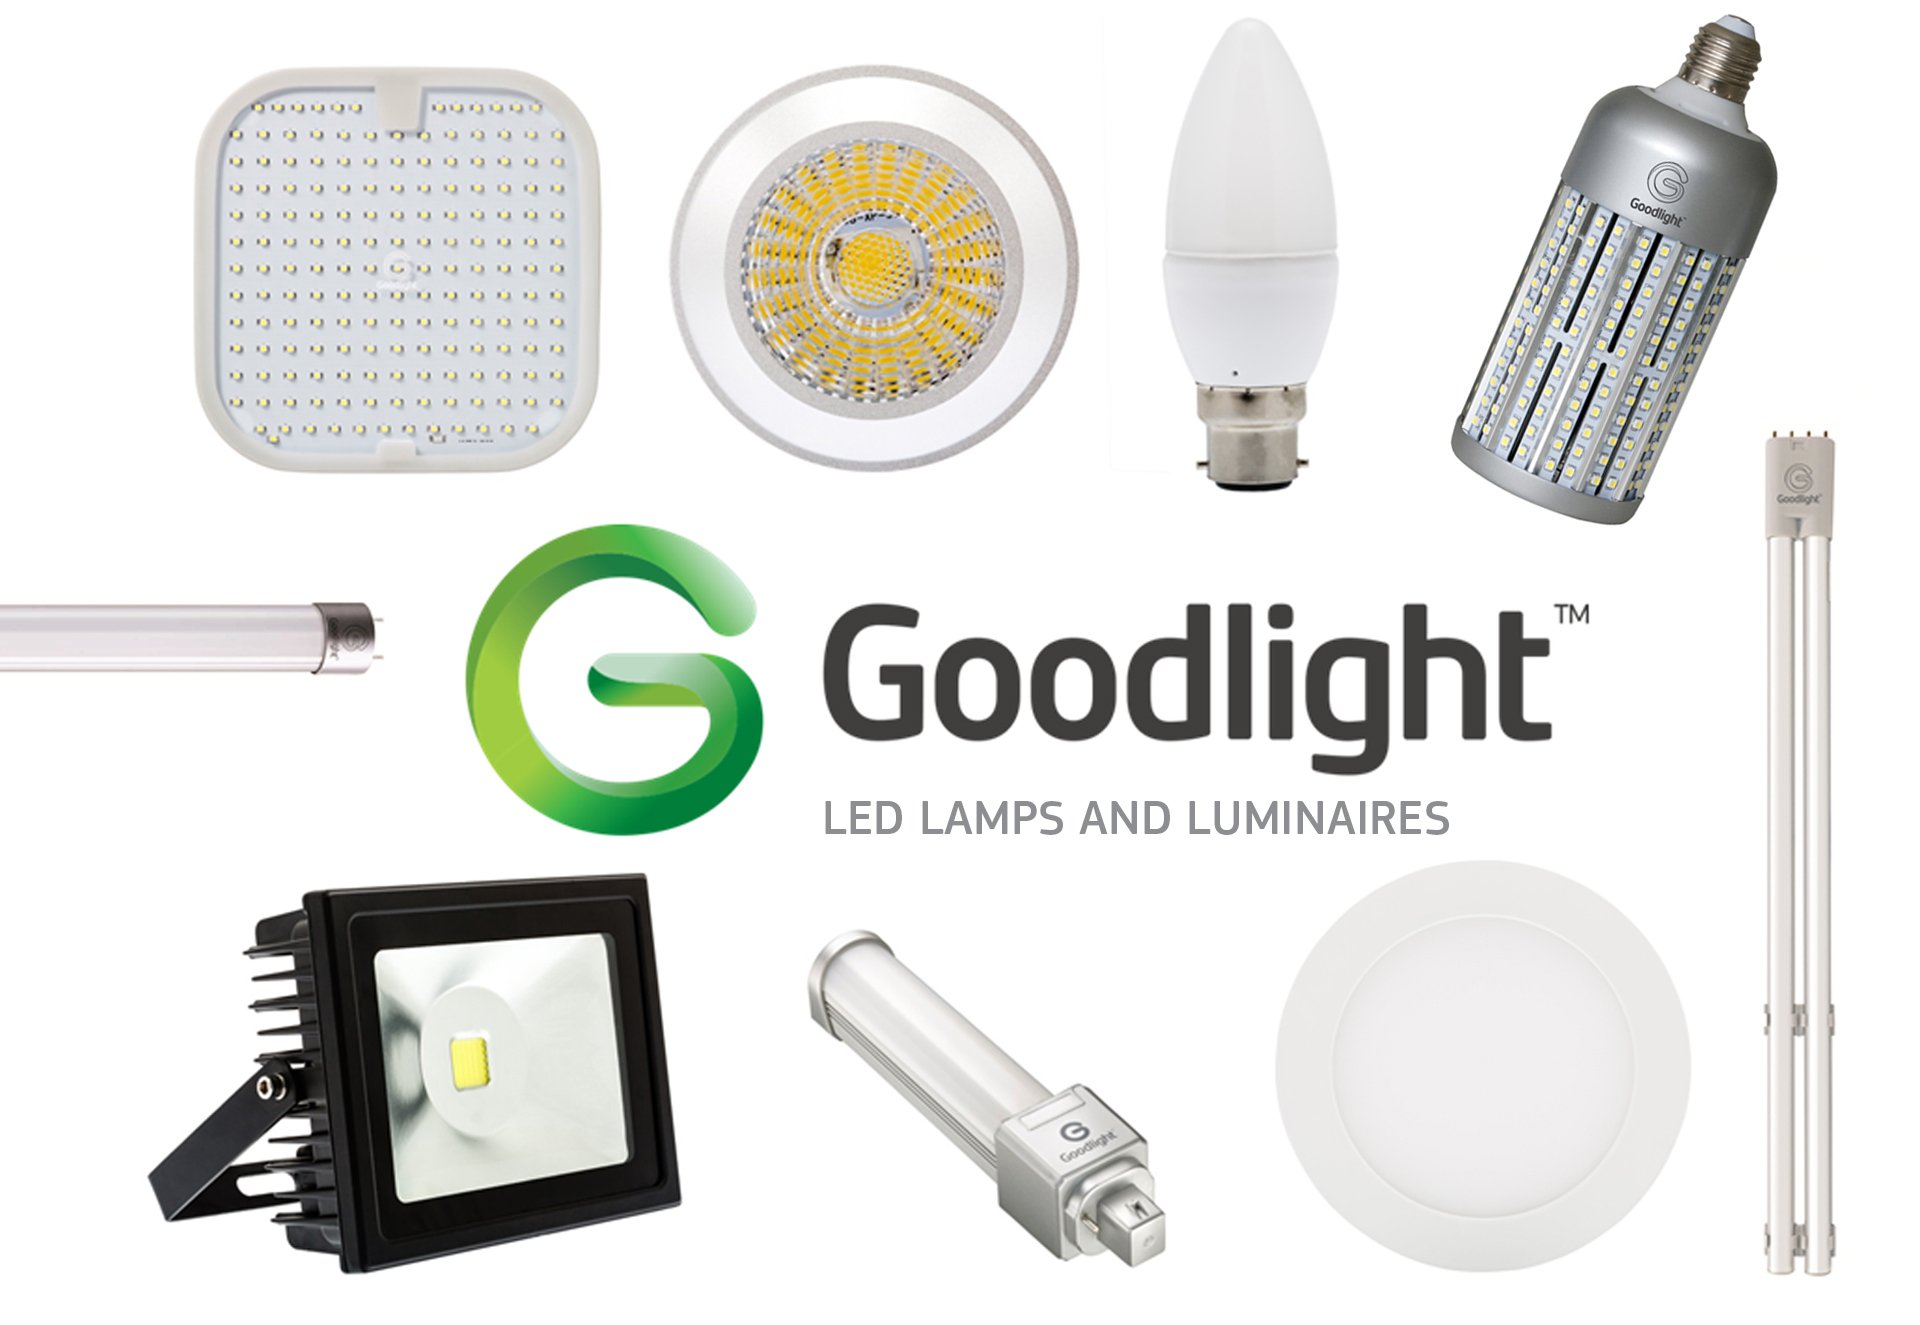 Goodlight - G360 LED SON Replacement led Lamps, Spotlights, Wall Washers, Tube, 2D G Sense, Light Discs, Candle Bulbs, PL Replacements, Floodlights